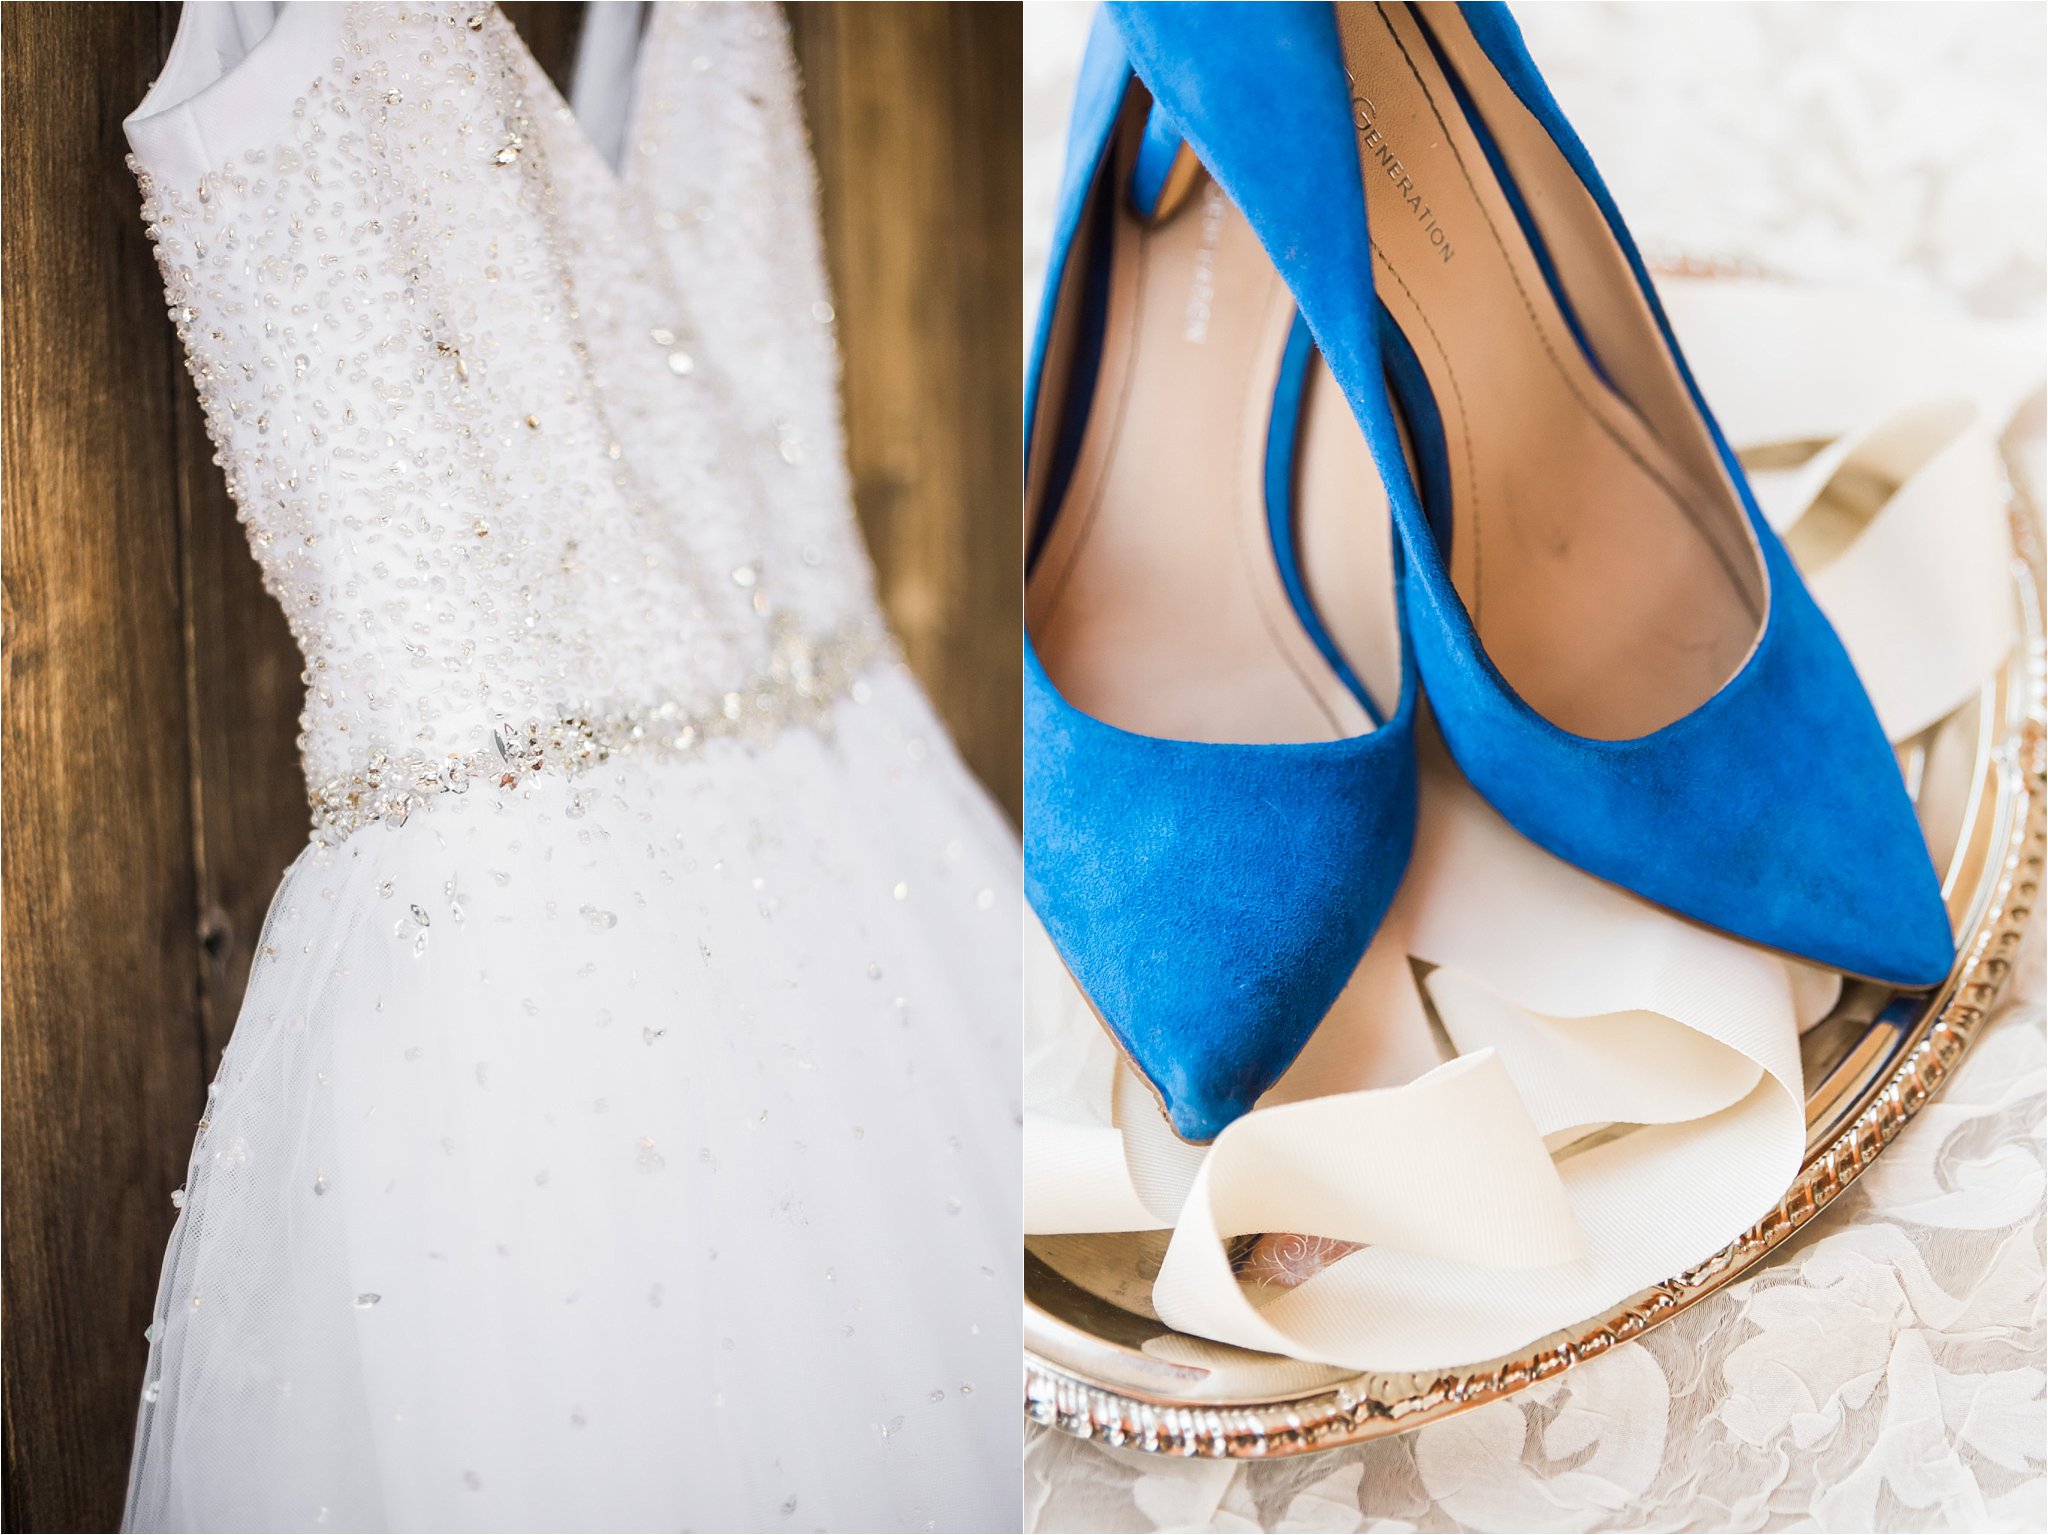 Classic Saguaro Buttes Wedding Dress And Blue Shoes Photo